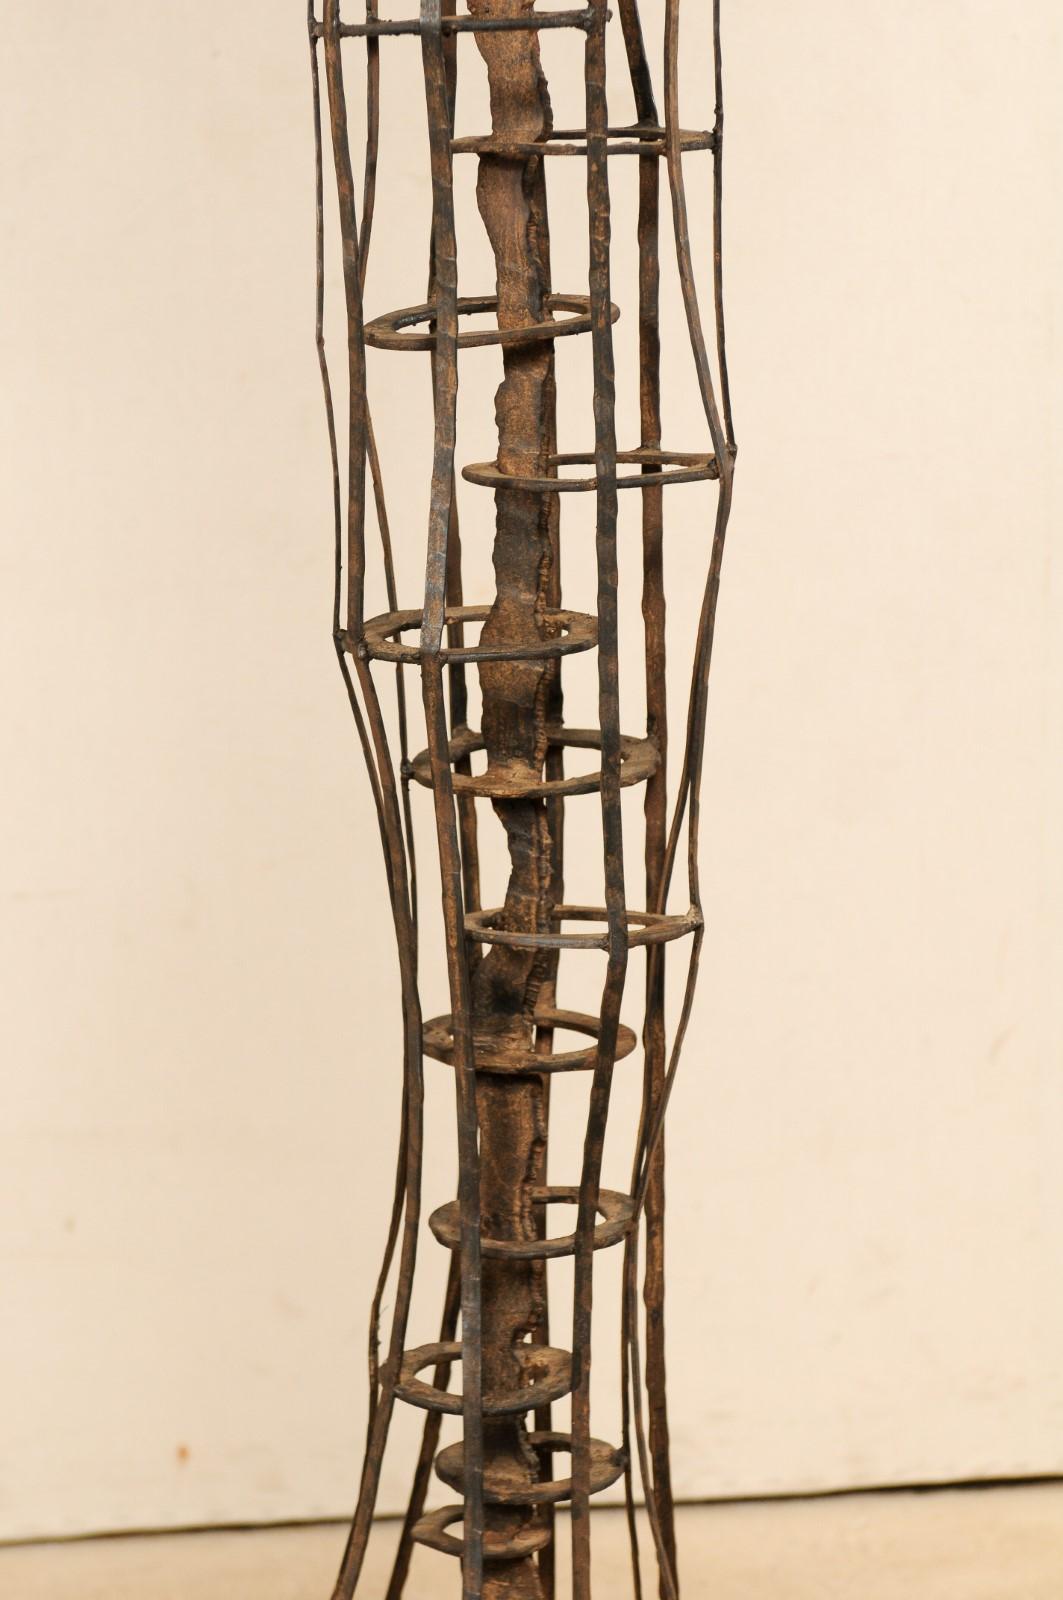 Tall French Sculptural Iron Abstract Art Piece, circa 1930s-1940s For Sale 2